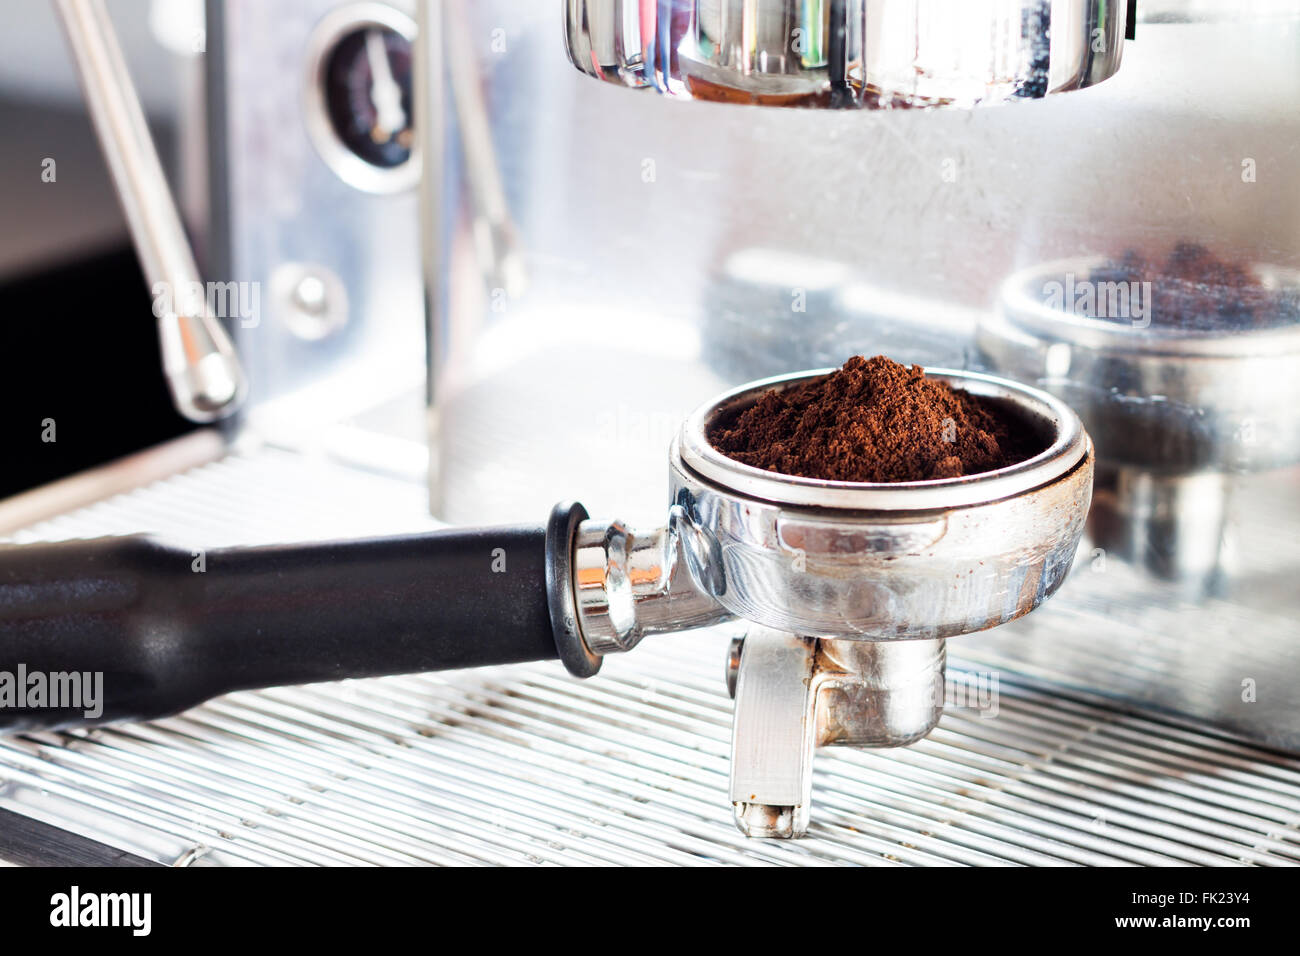 Coffee grind in group with coffee machine, stock photo Stock Photo